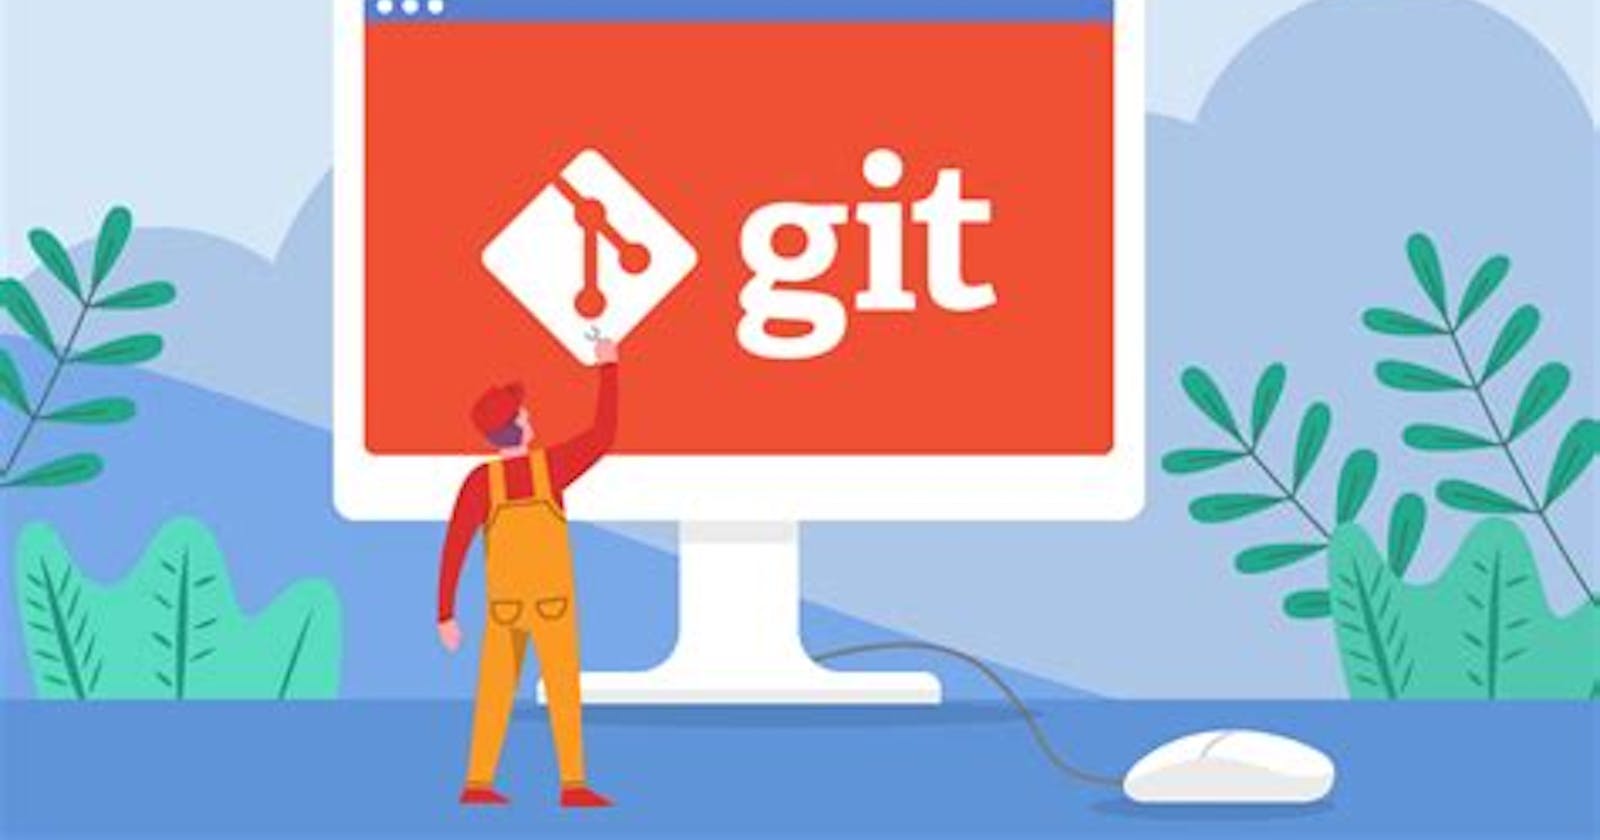 Install and Configure Git on Linux and Windows